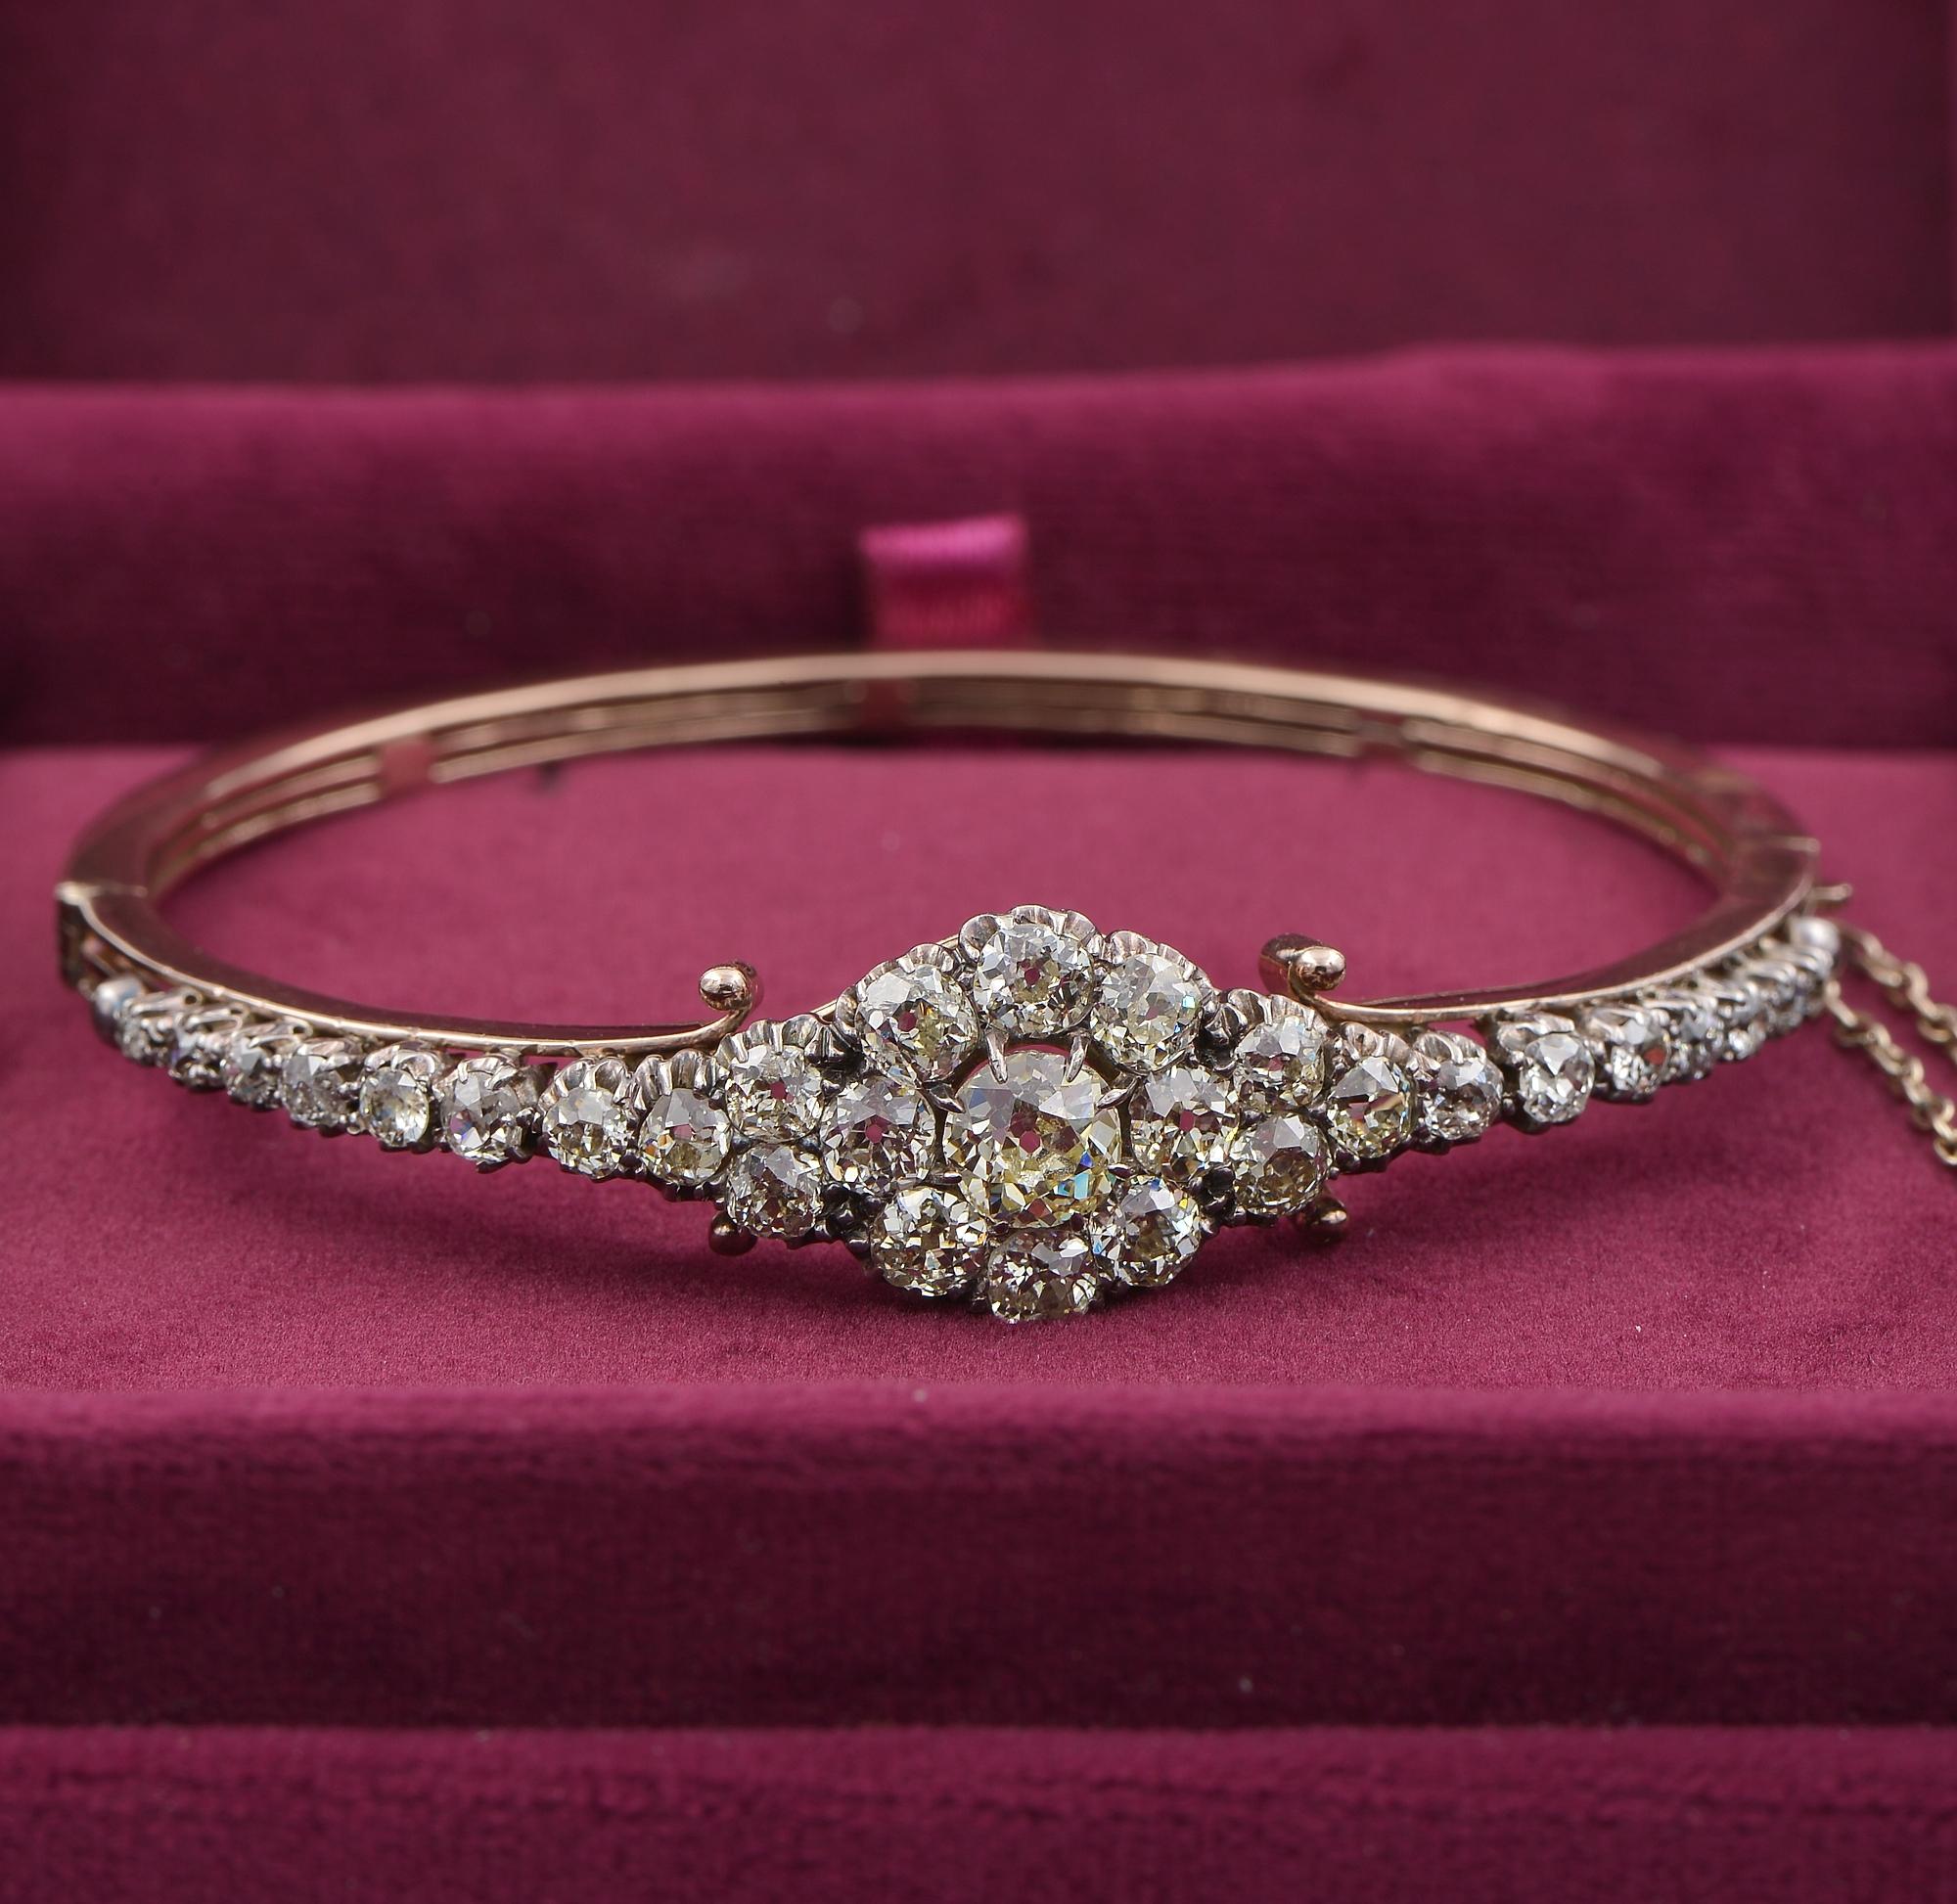 Classy Victorian Statement
An exceptional Victorian bangle dating 1870 ca
Hand crafted at the highest standards of solid 18 Kt gold and silver portions for the Diamond housing
The bangle faces up with a centre cluster of Diamond in the shape of a